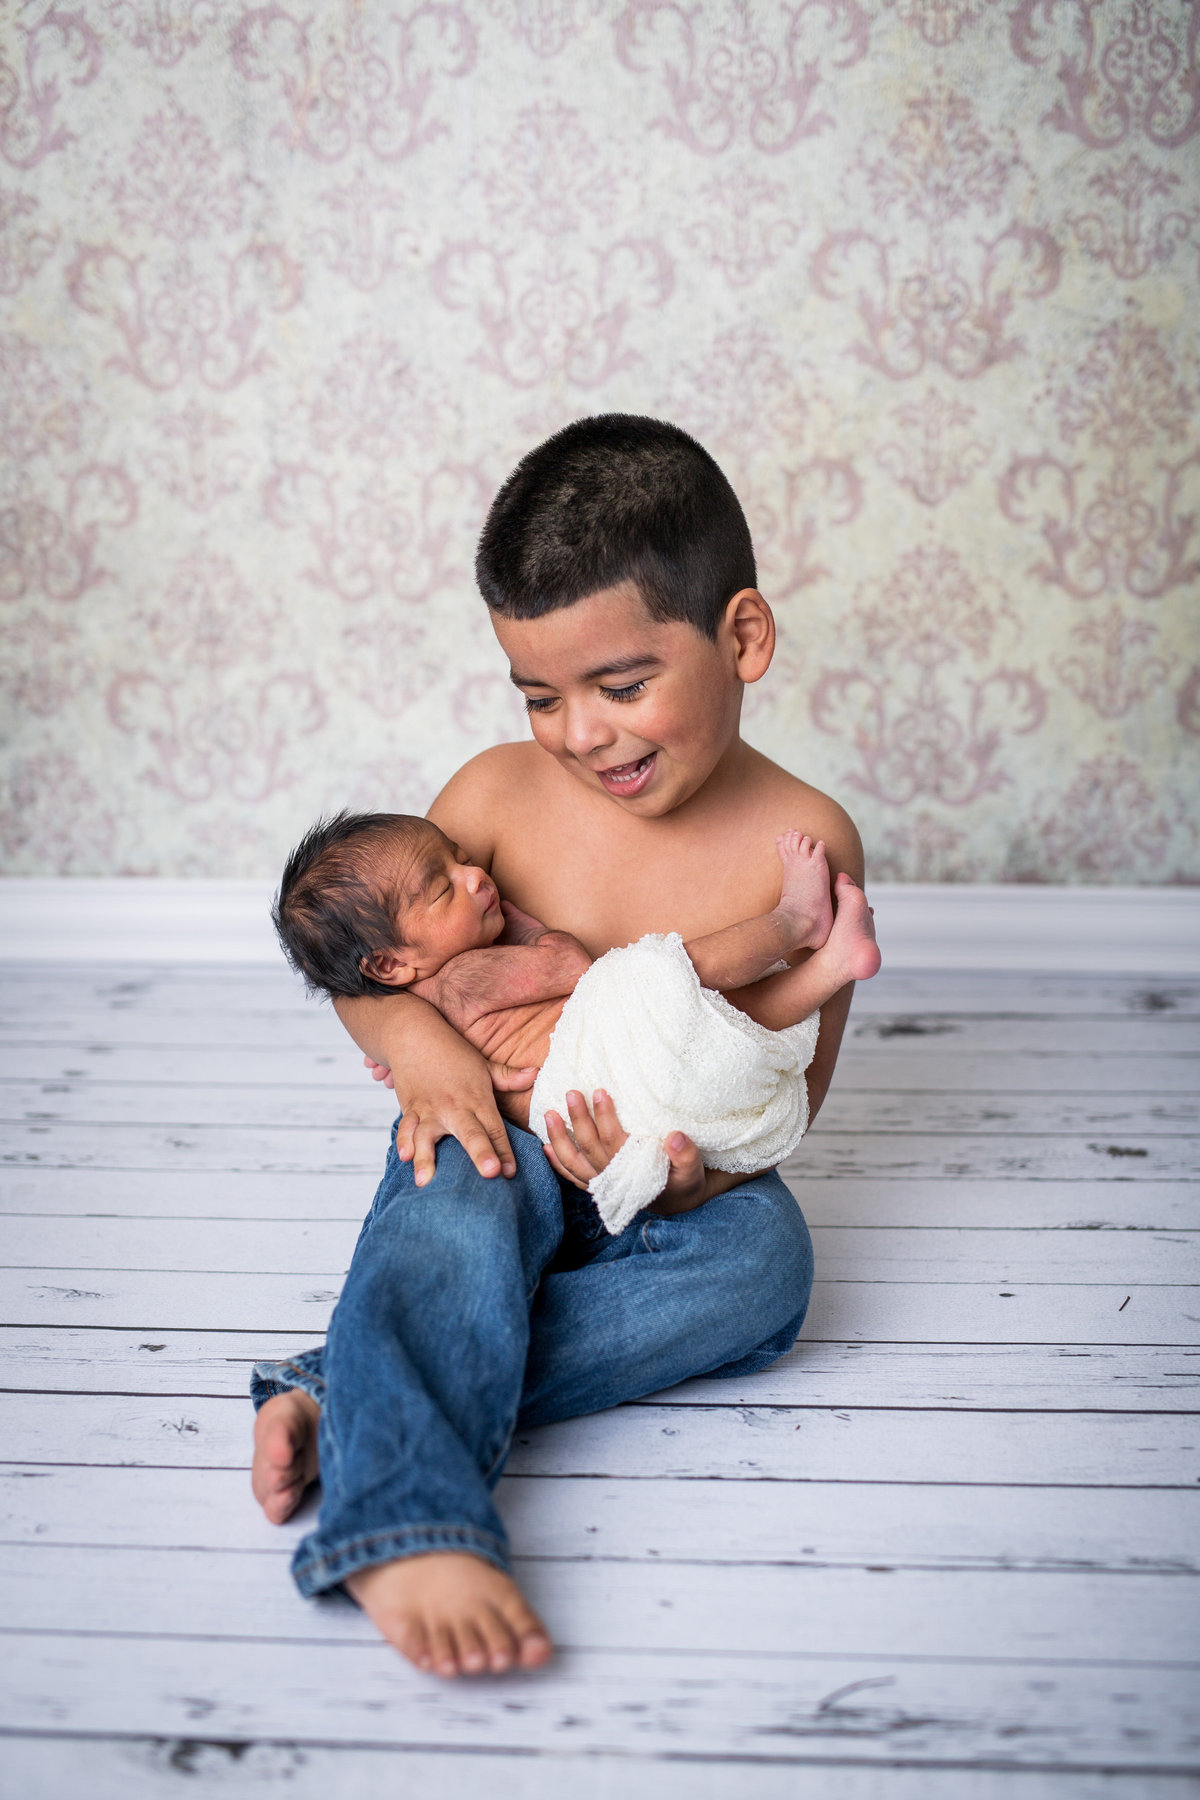 Brother holding newborn sister in his arms on s wooden floor in a photography studio